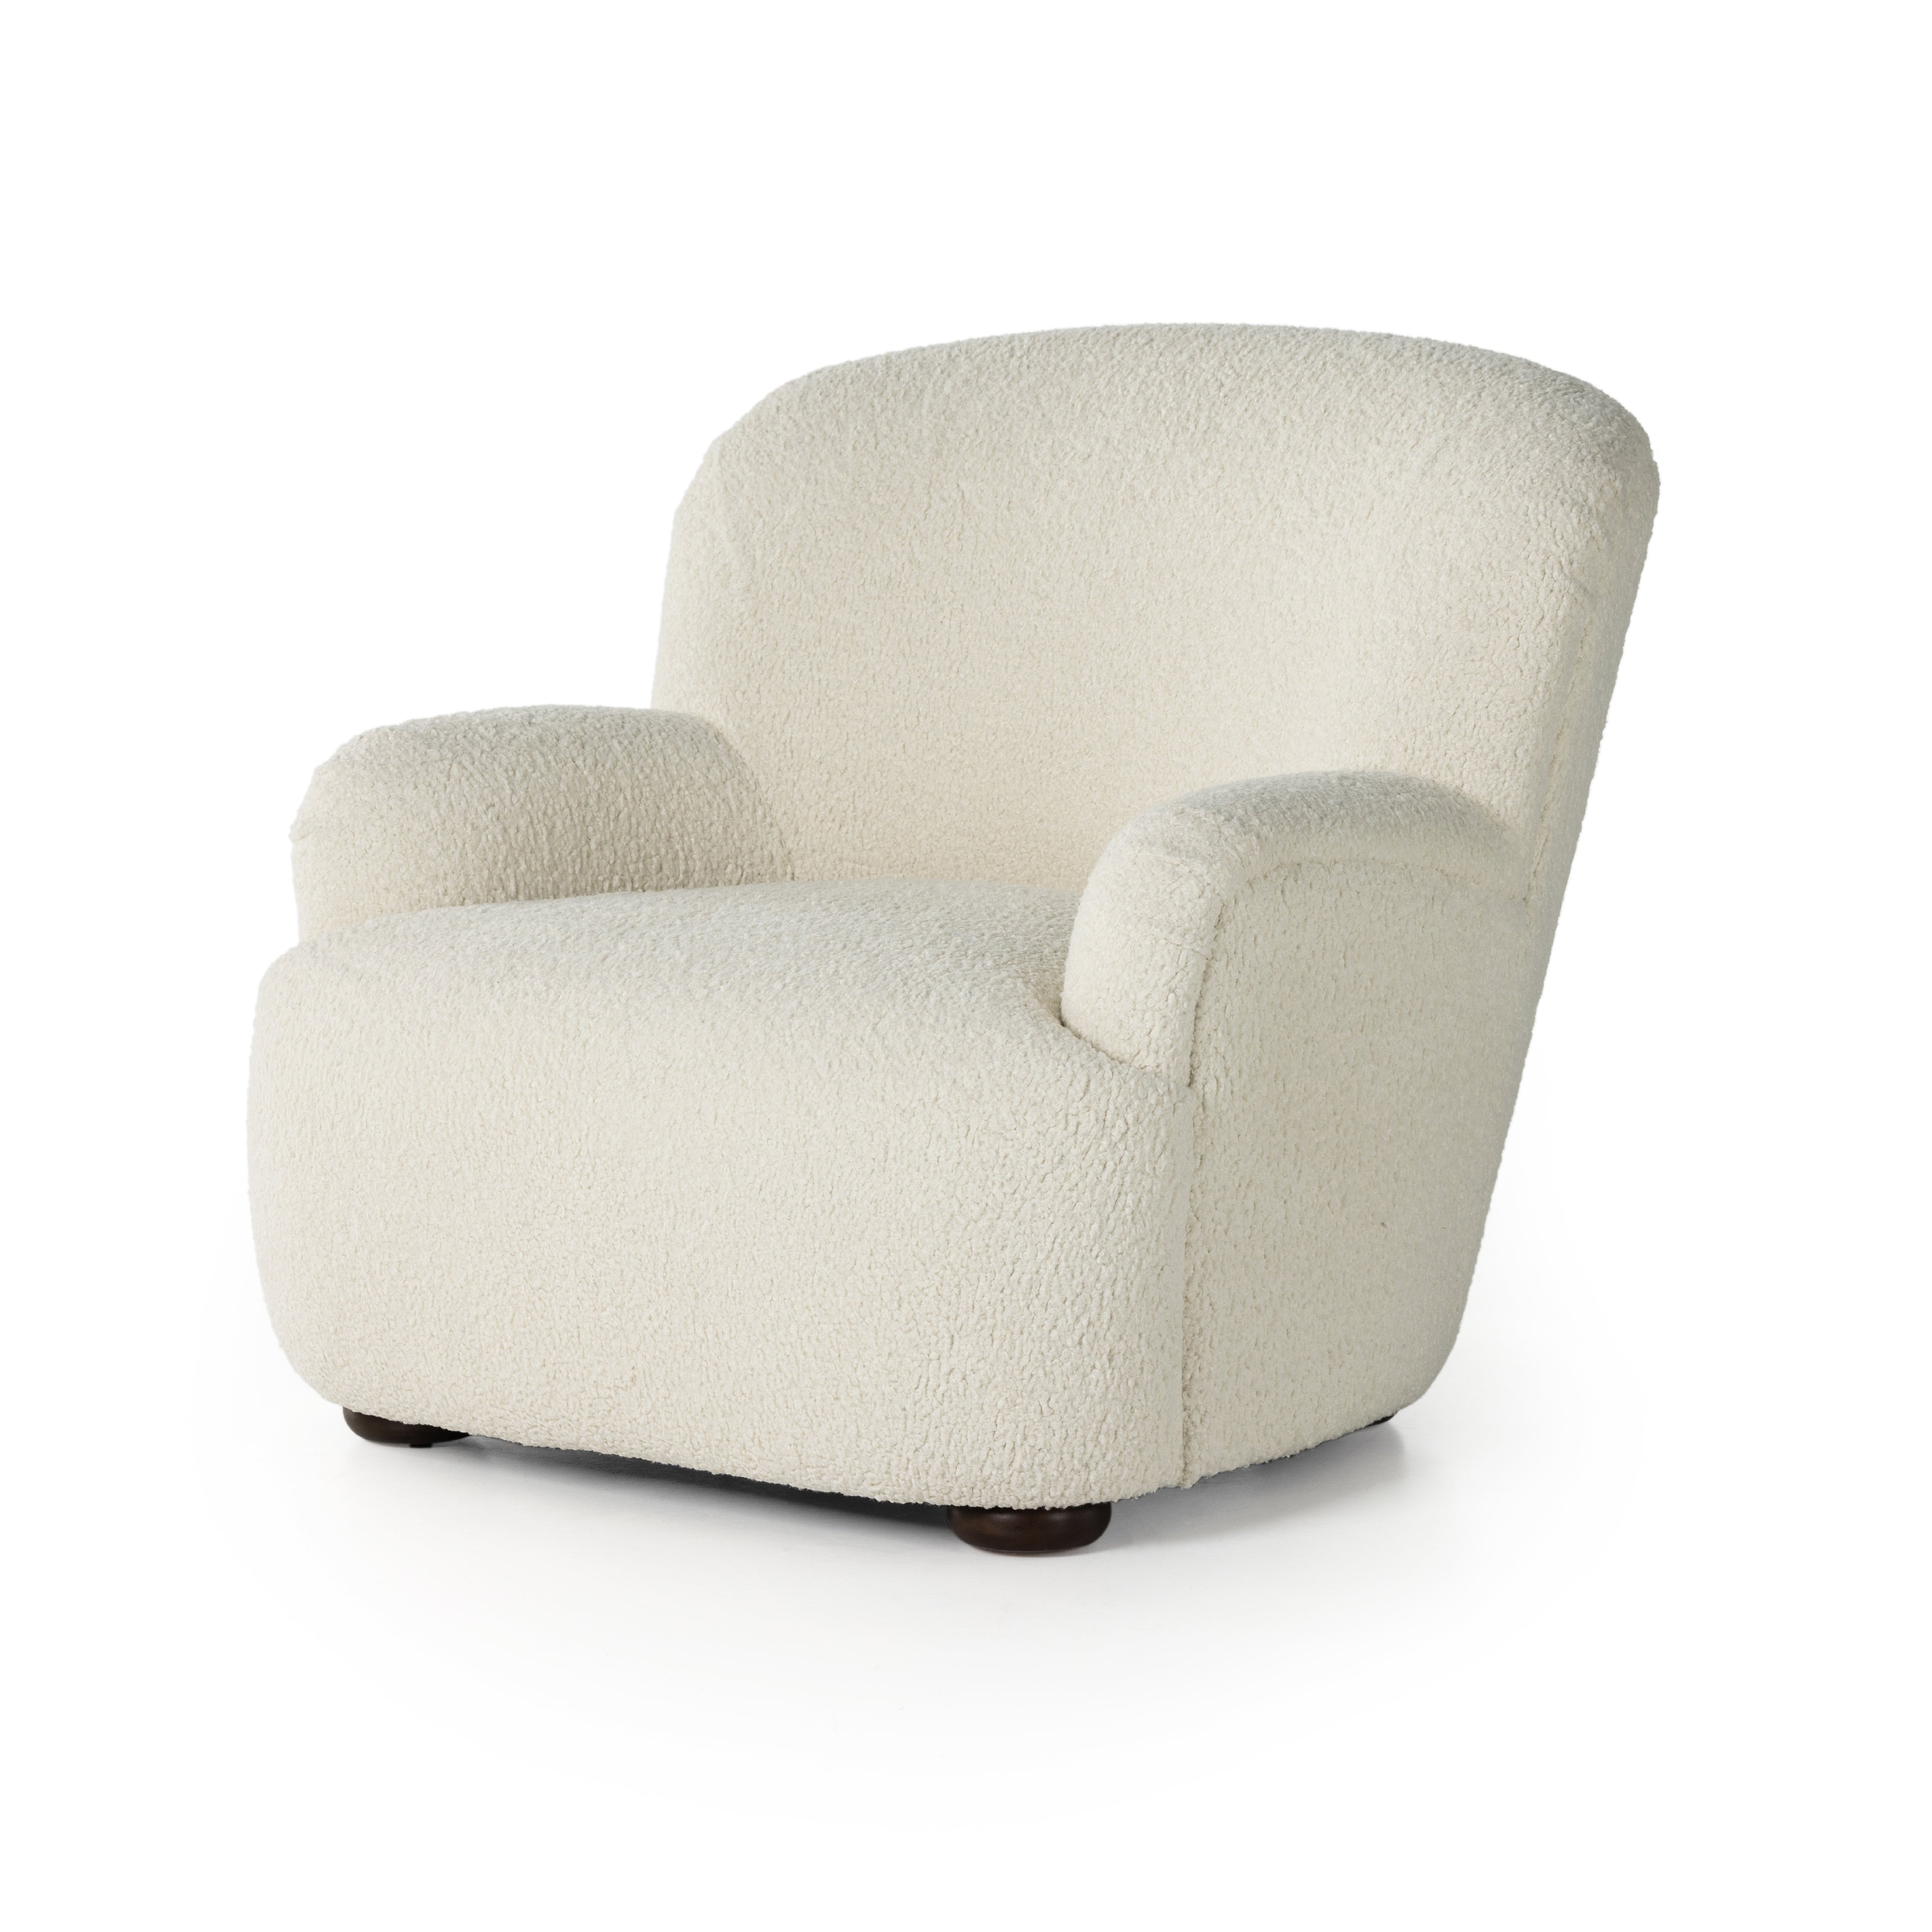 Kadon Sheepskin Natural Chair's high wing back pairs with softly rolled arms for a curvy look and supportive sit. Cream shearling-like upholstery invites you to sit and stay a while Amethyst Home provides interior design services, furniture, rugs, and lighting in the Monterey metro area.